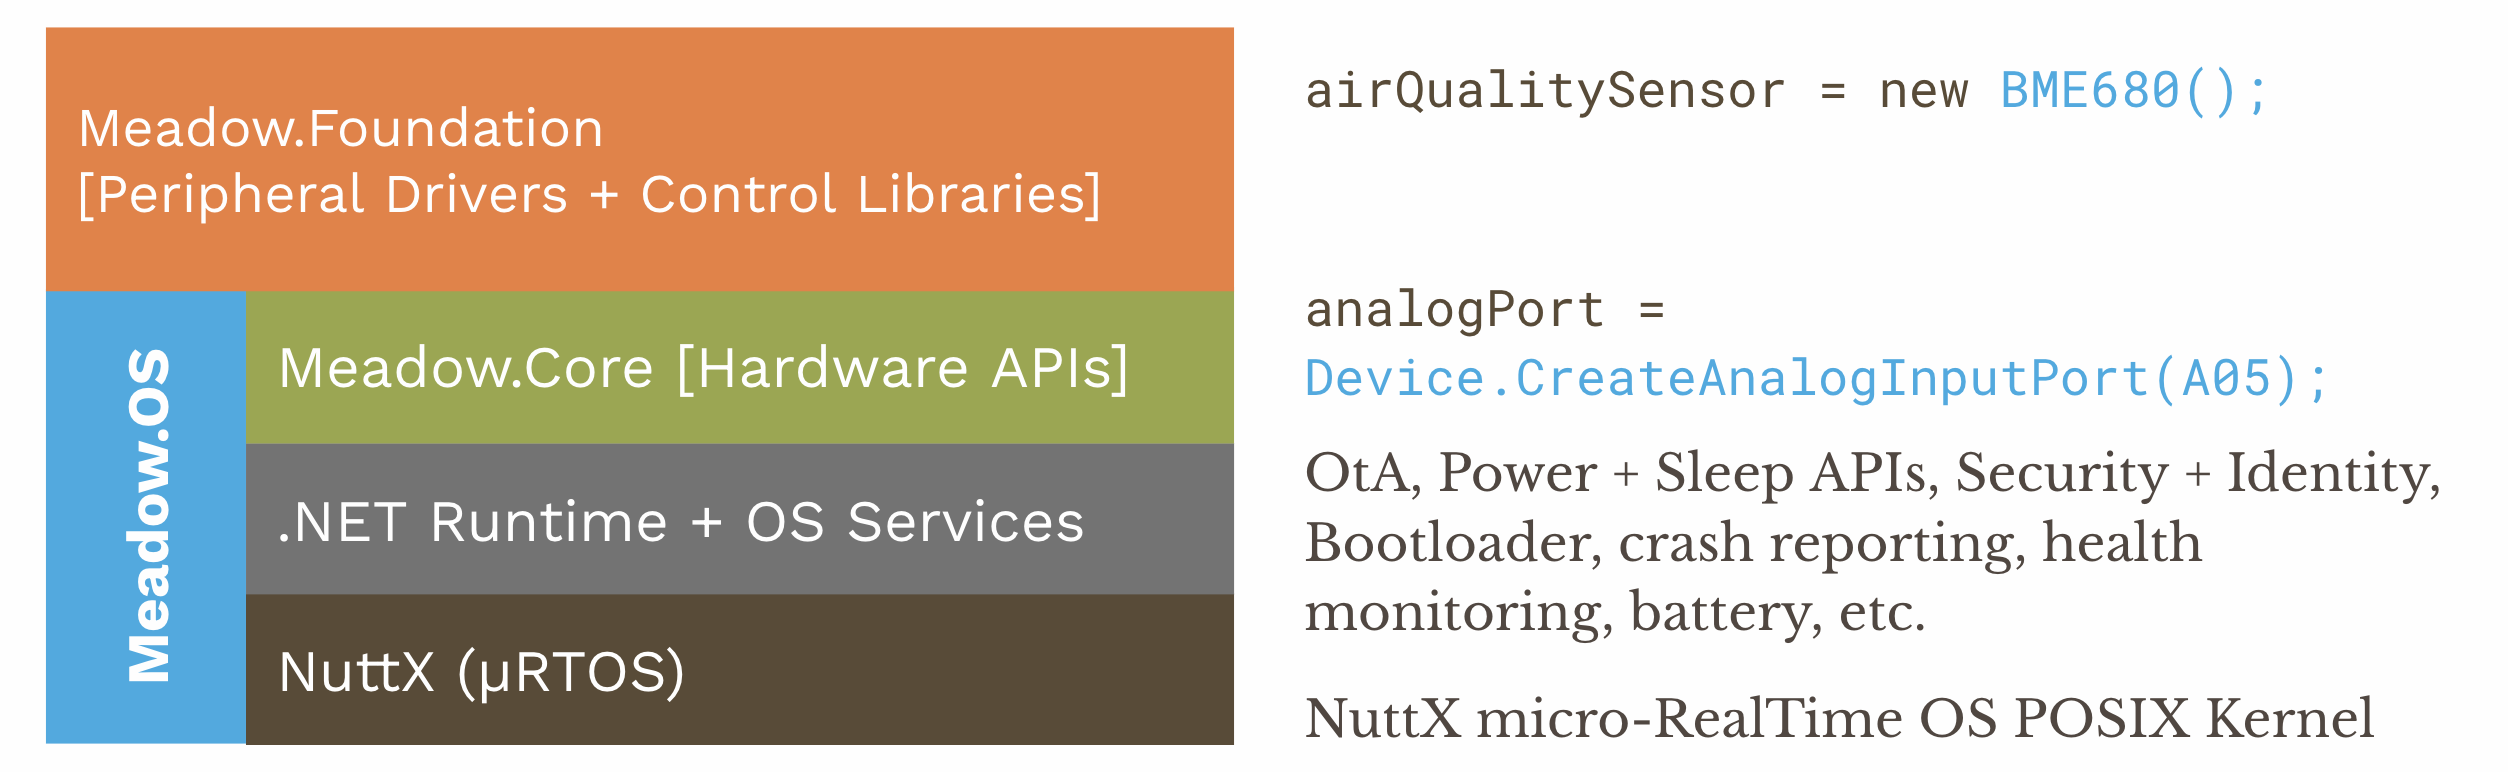 Illustration fo the Wilderness Labs IoT Platform stack including Meadow.Foundation (with an associated sensor code sample), Meadow.Core (with a sample hardware API), and the OS services layer including things like sleep APIs, health-monitoring, etc.